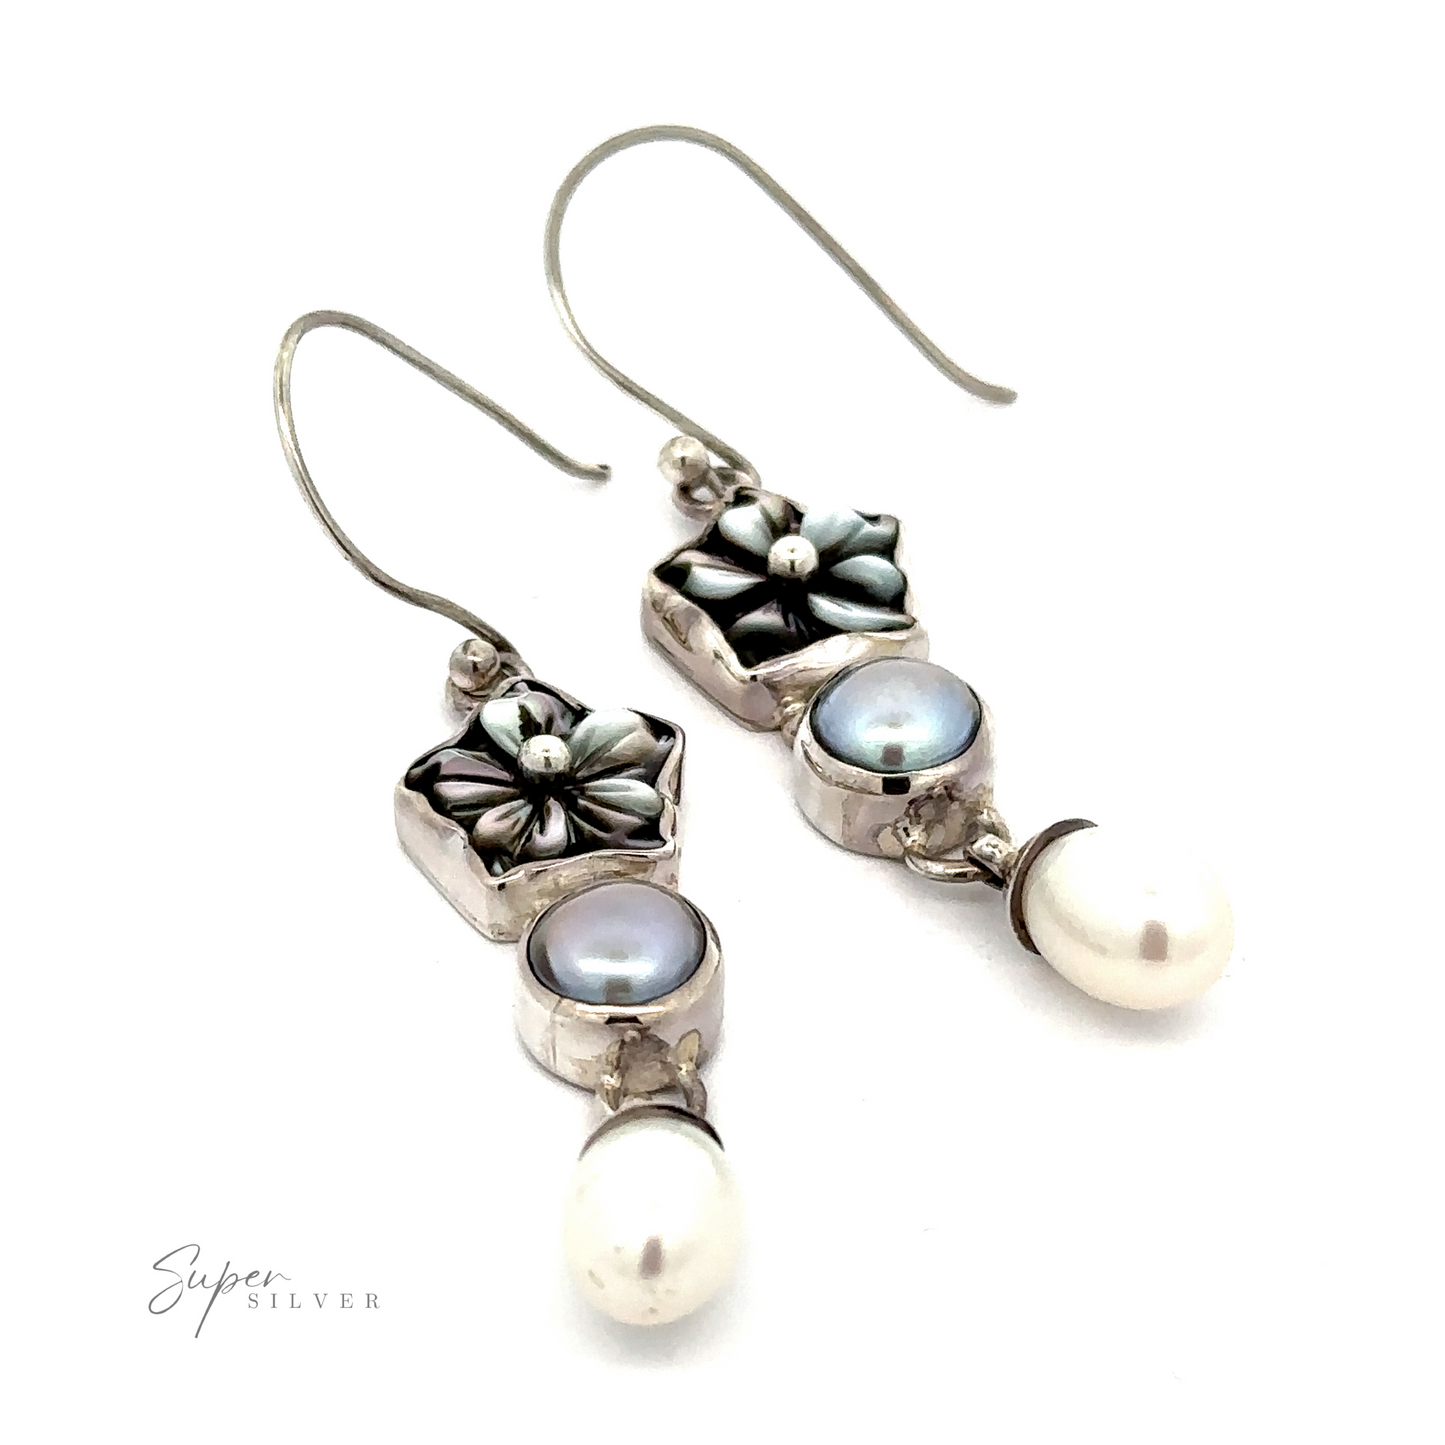 
                  
                    Pair of sterling silver drop earrings featuring floral designs, blue mother-of-pearl accents, and white pearls at the bottom. The image includes the brand name "Super Silver." These elegant Floral Pearl Bead Earrings add a touch of sophistication to any outfit.
                  
                